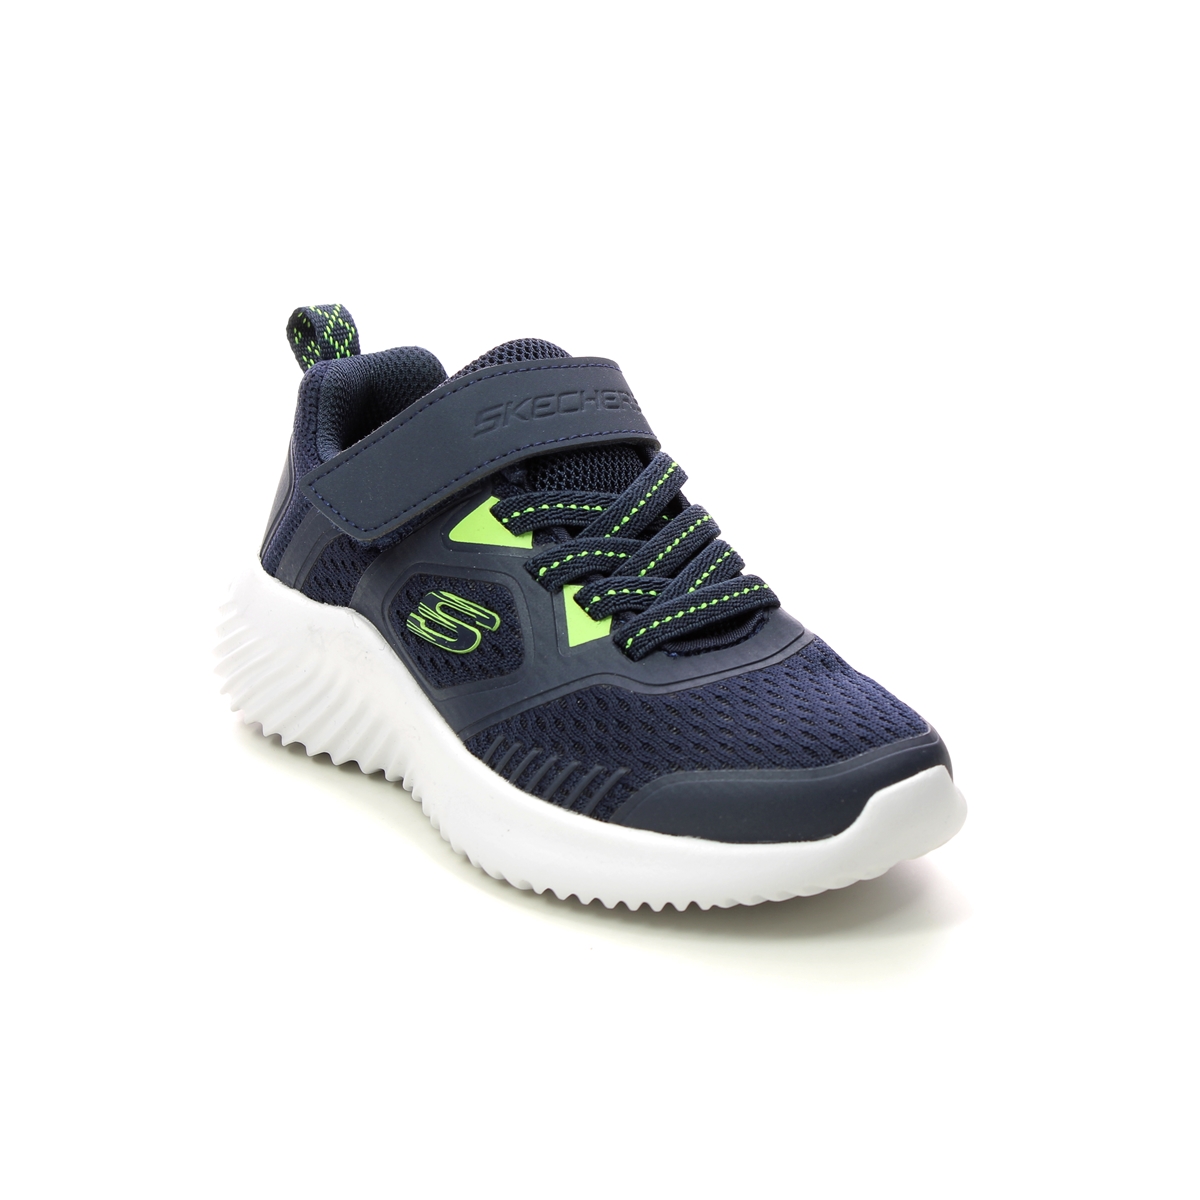 Skechers Bounder Navy Lime Kids Trainers 403736L In Size 28 In Plain Navy Lime For kids